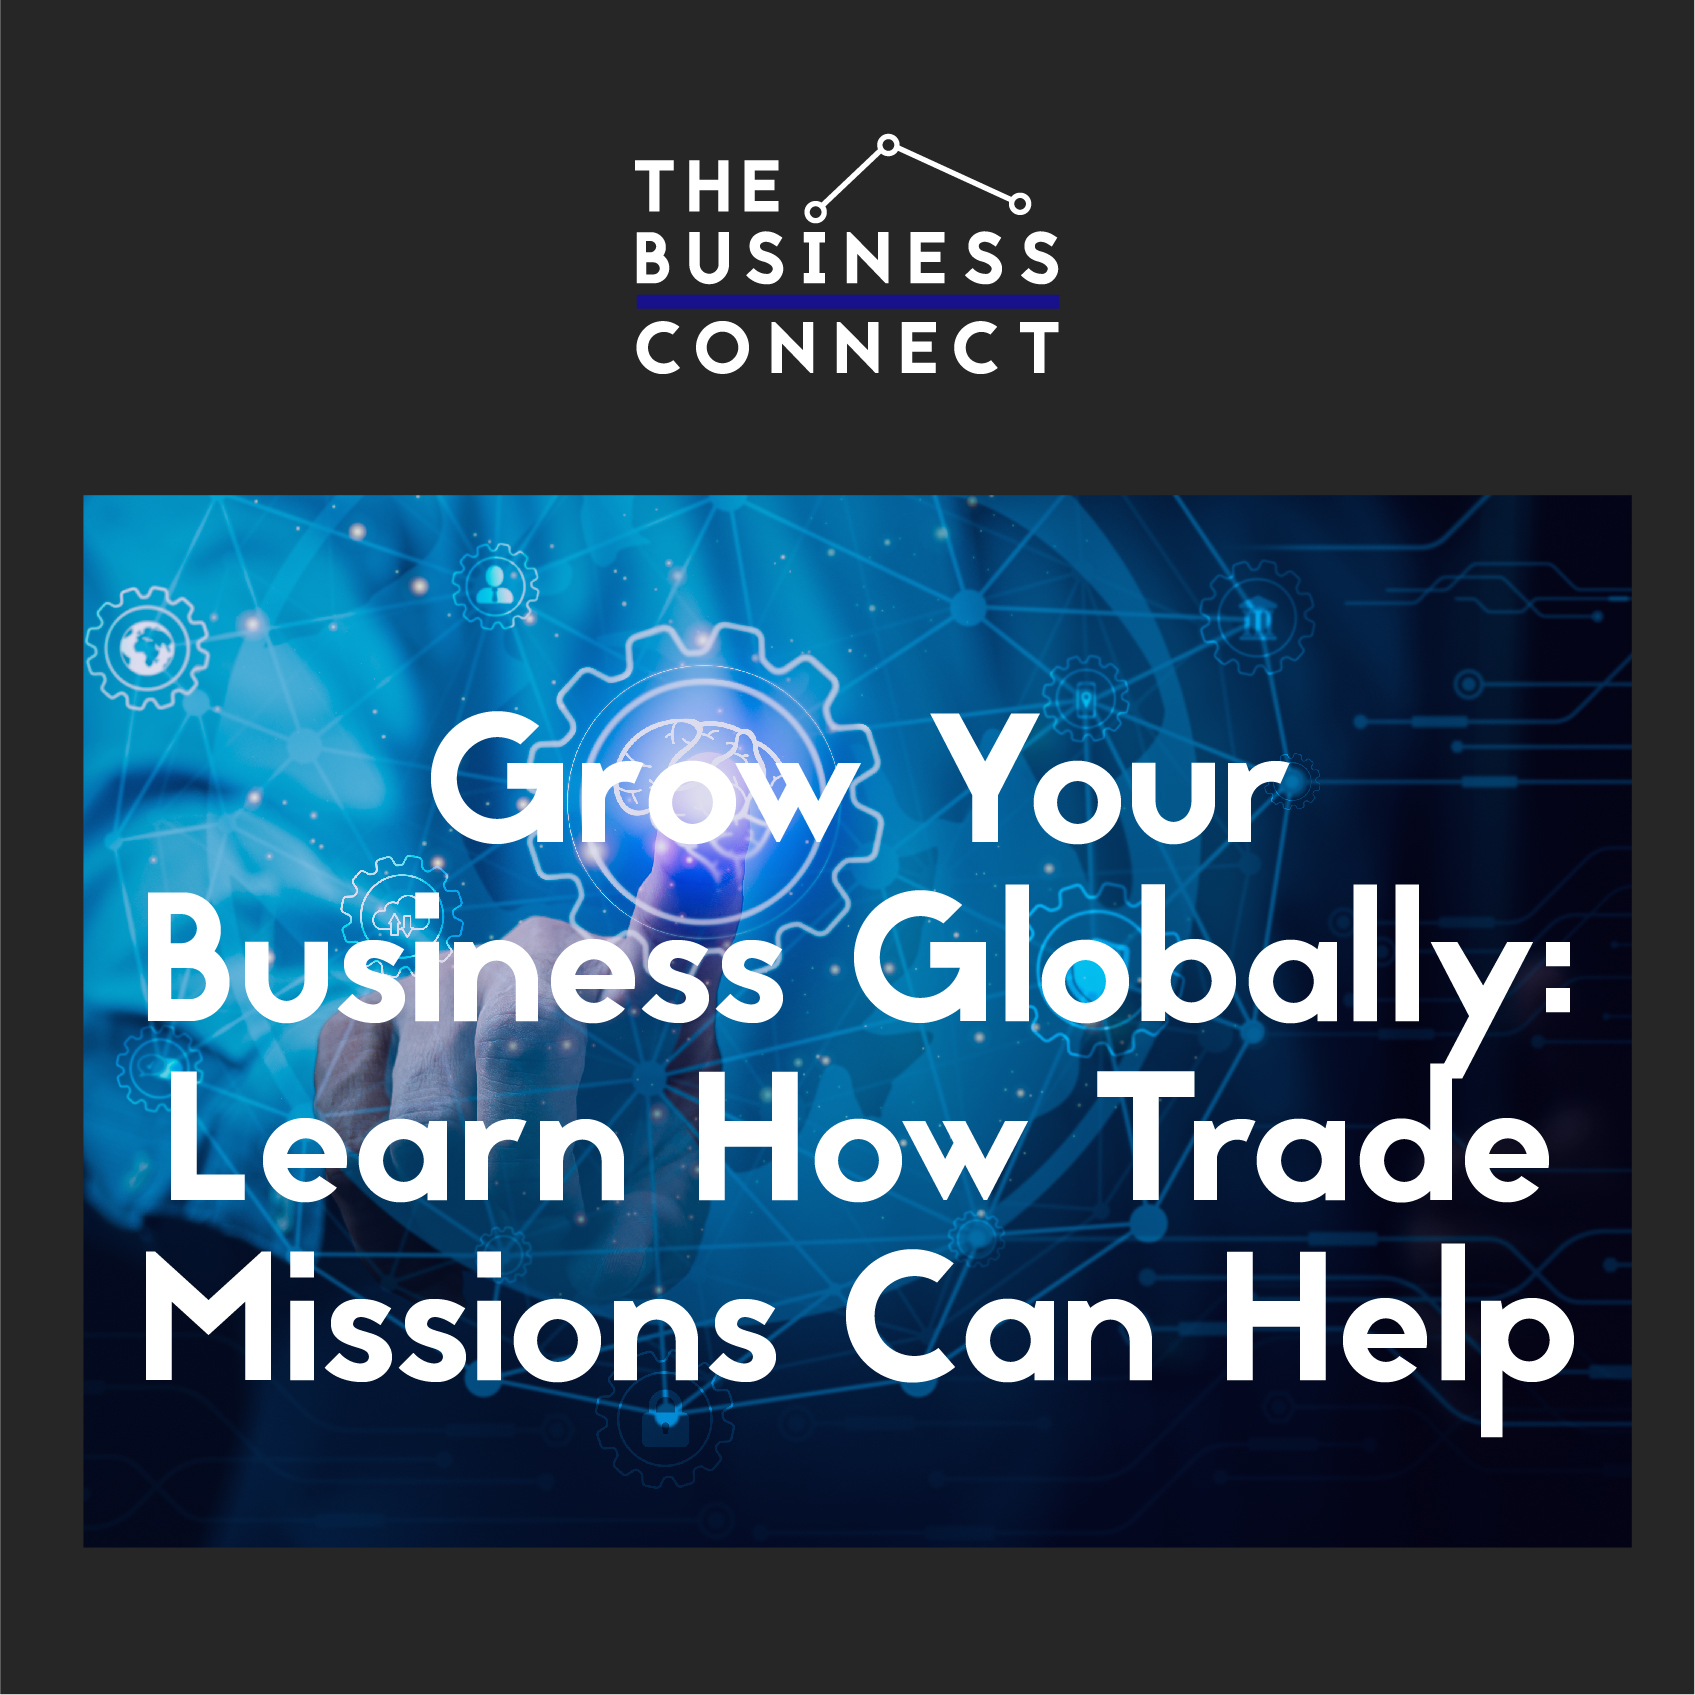 Grow Your Business Globally: Learn How Trade Missions Can Help